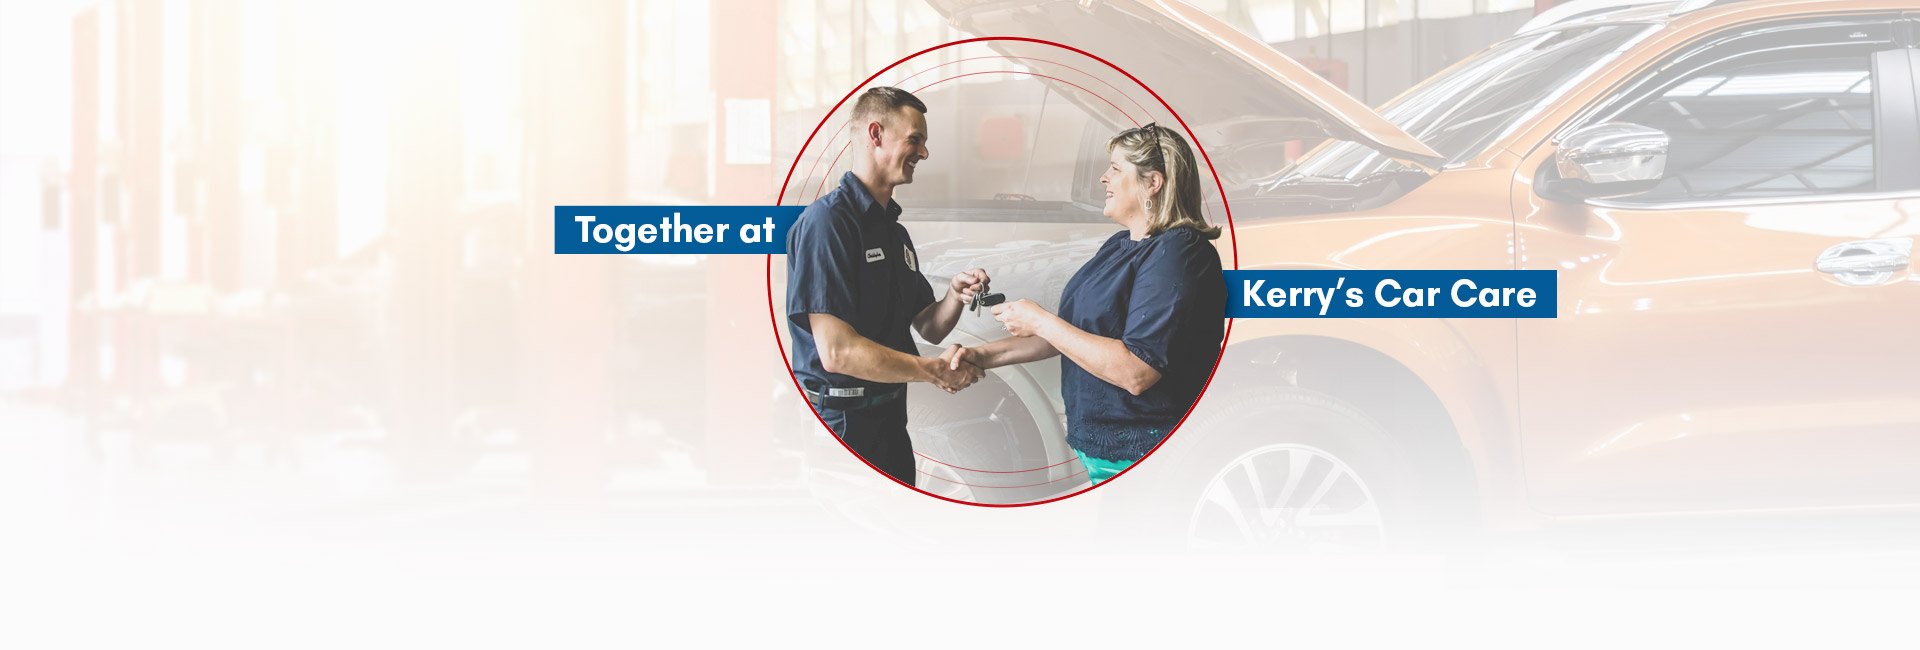 Together at Kerry's Car Care